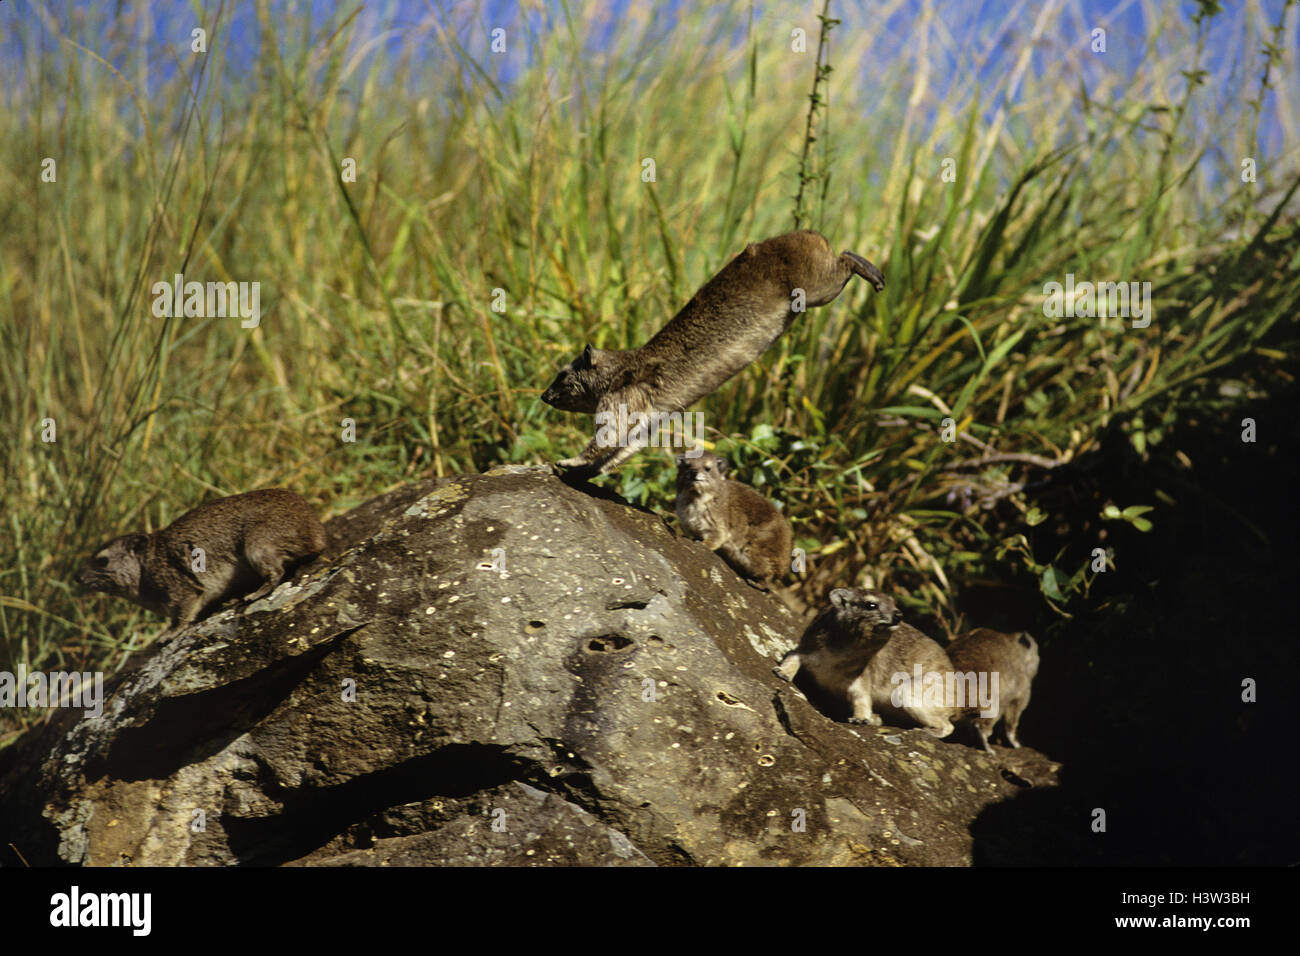 Hyrax-(heterohyrax brucei) Banque D'Images